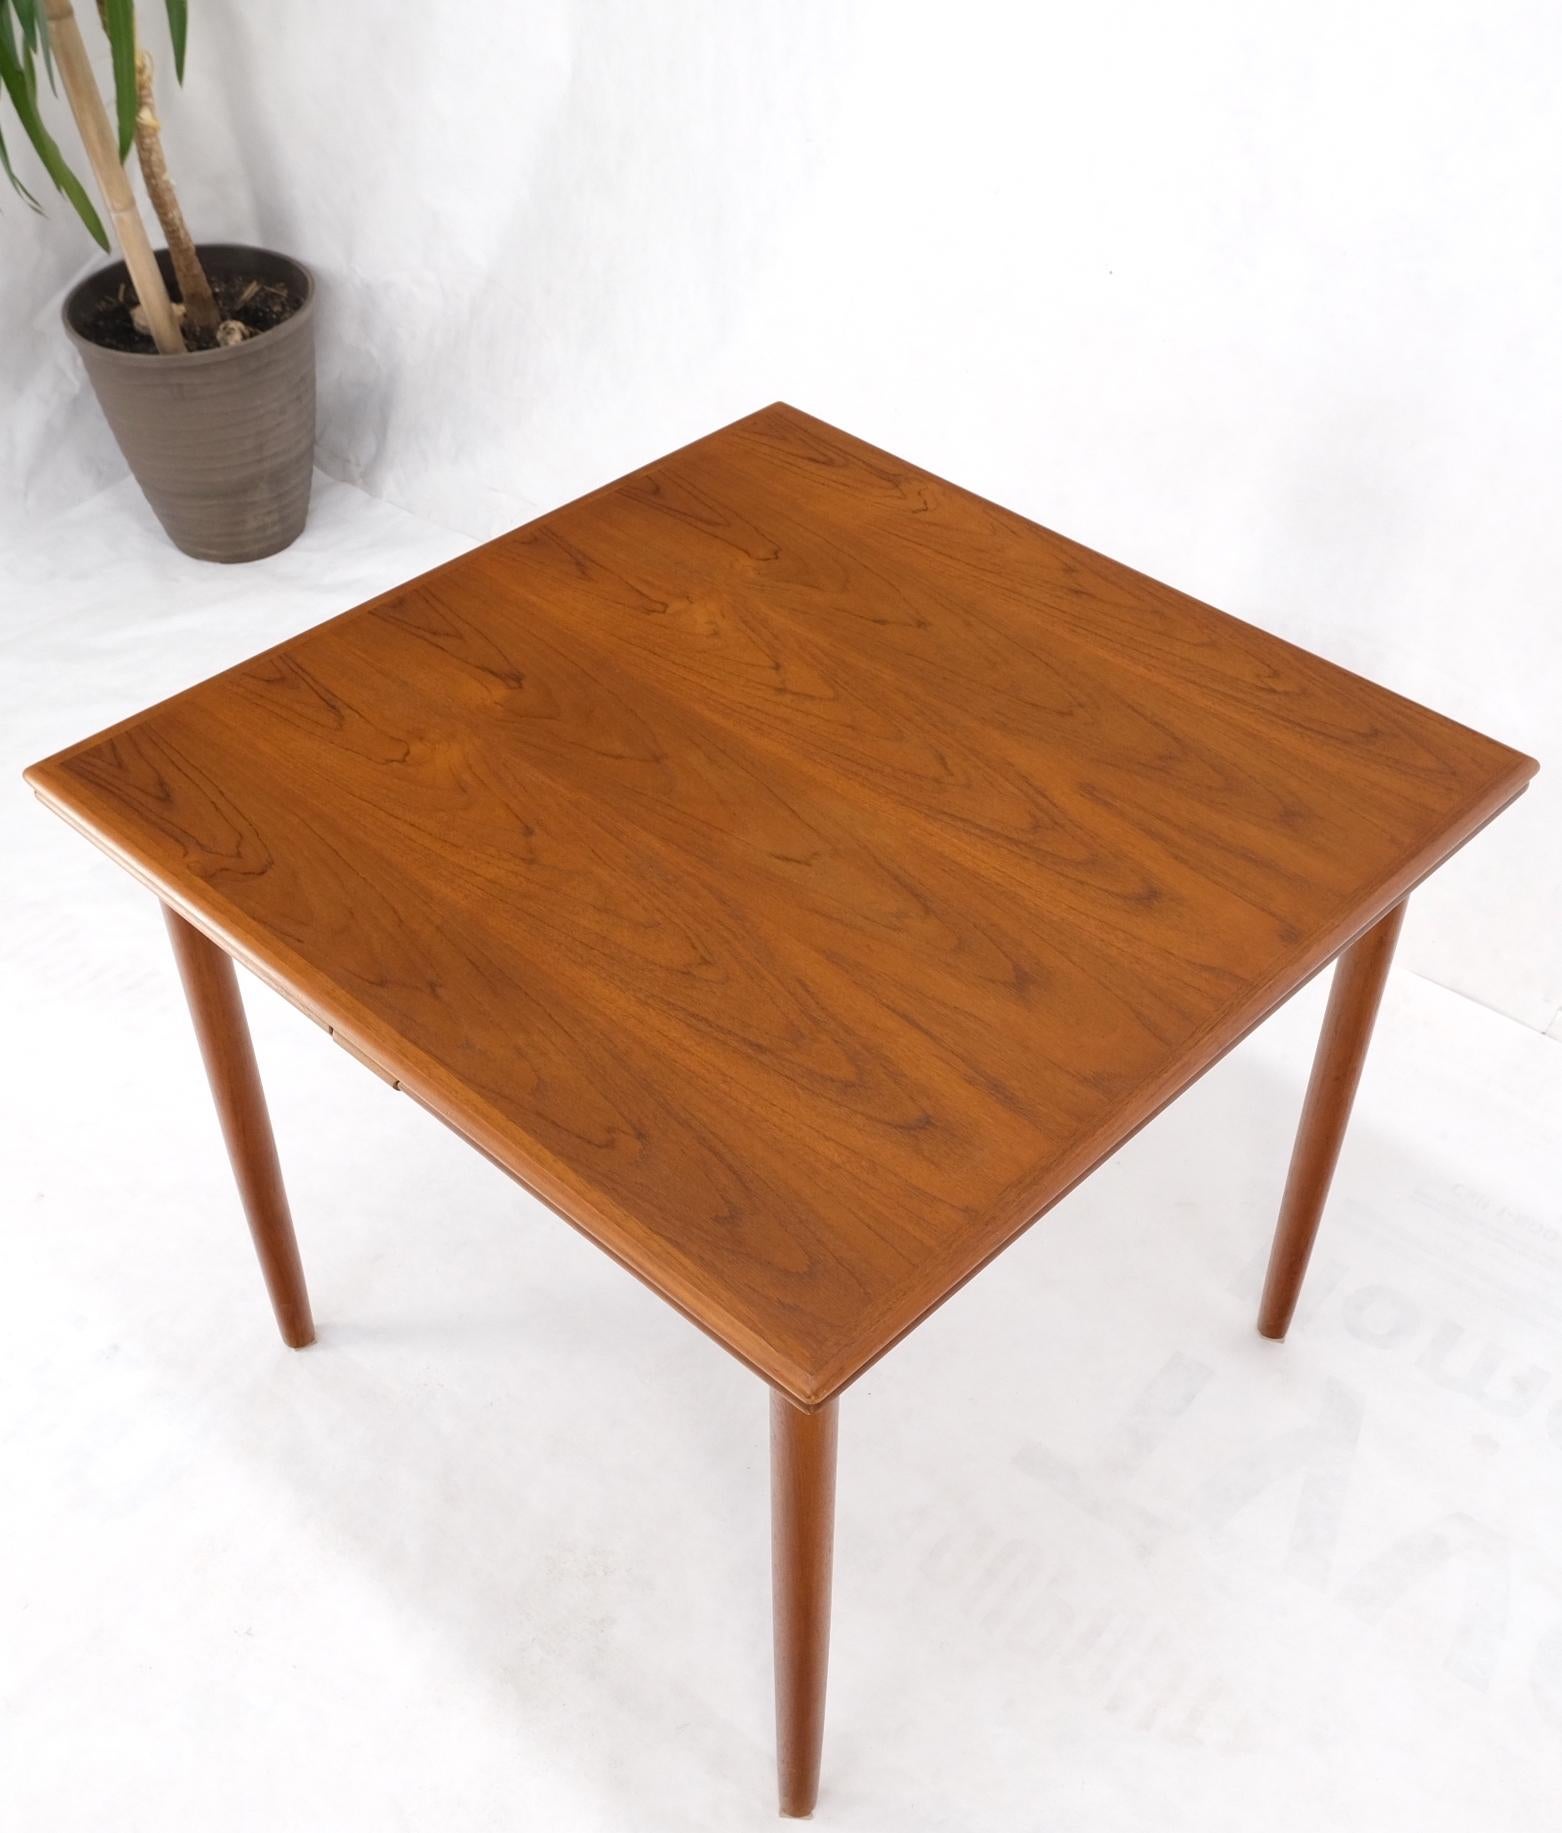 Danish Mid-Century Modern Square Teak Refectory Extension Boards Dining Table For Sale 9